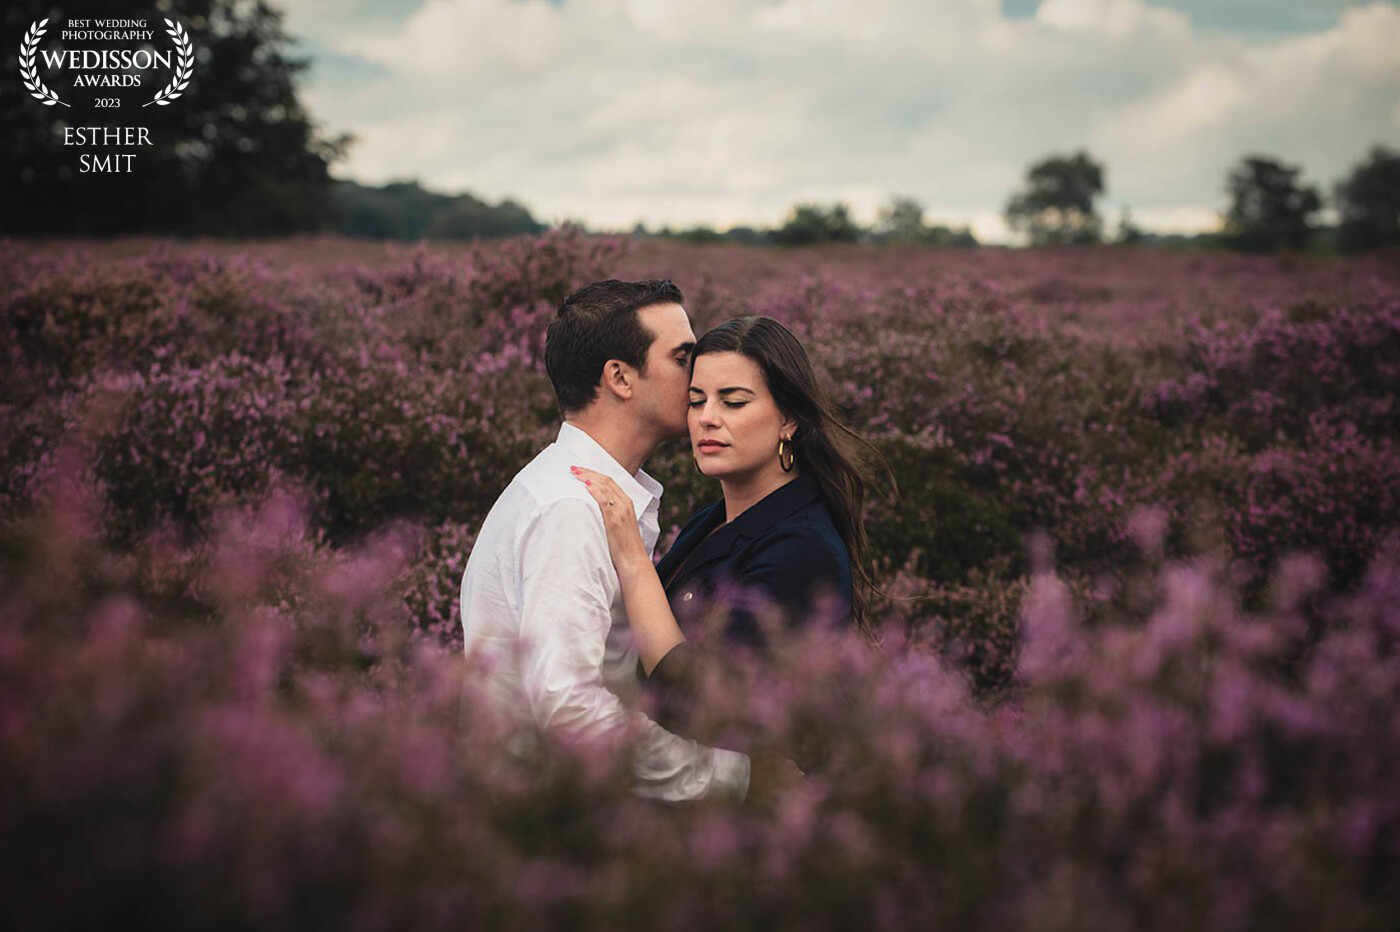 Ayda and Remko booked me for their wedding which will be taking place in 2024 and wanted to do a loveshoot this year. We decided to wait untill August so we could shoot in the blooming heather. The weather wasn't what we had hoped for, we even had some rainshowers, but it was a great evening anyway and we even saw some deer crossing the heathland.